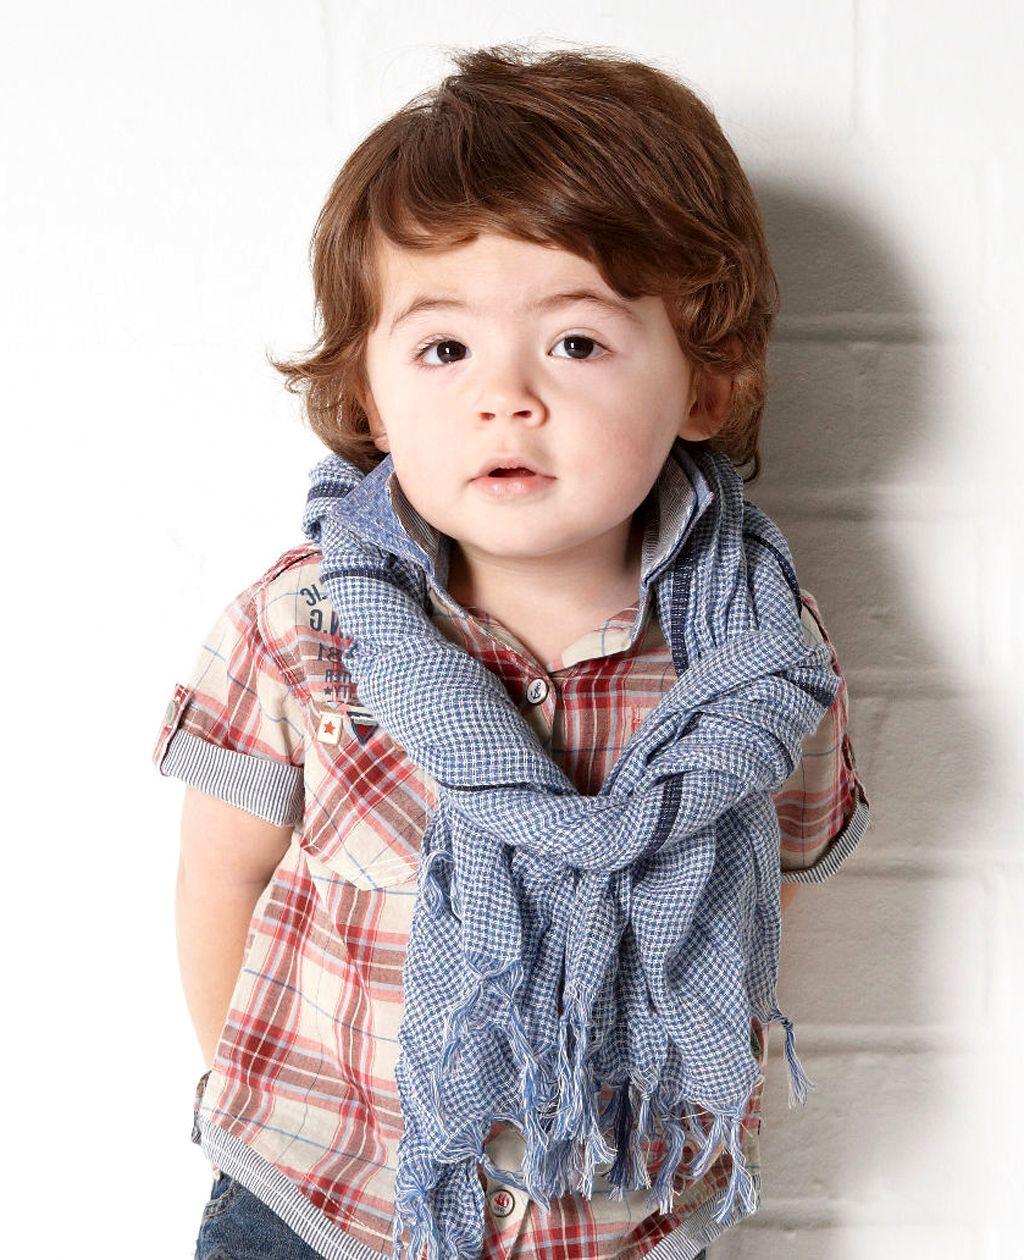 cutest kids Boy Baby Wallpaper Download Cool Looking Boy. Cute baby wallpaper, Cute baby boy picture, Baby boy picture